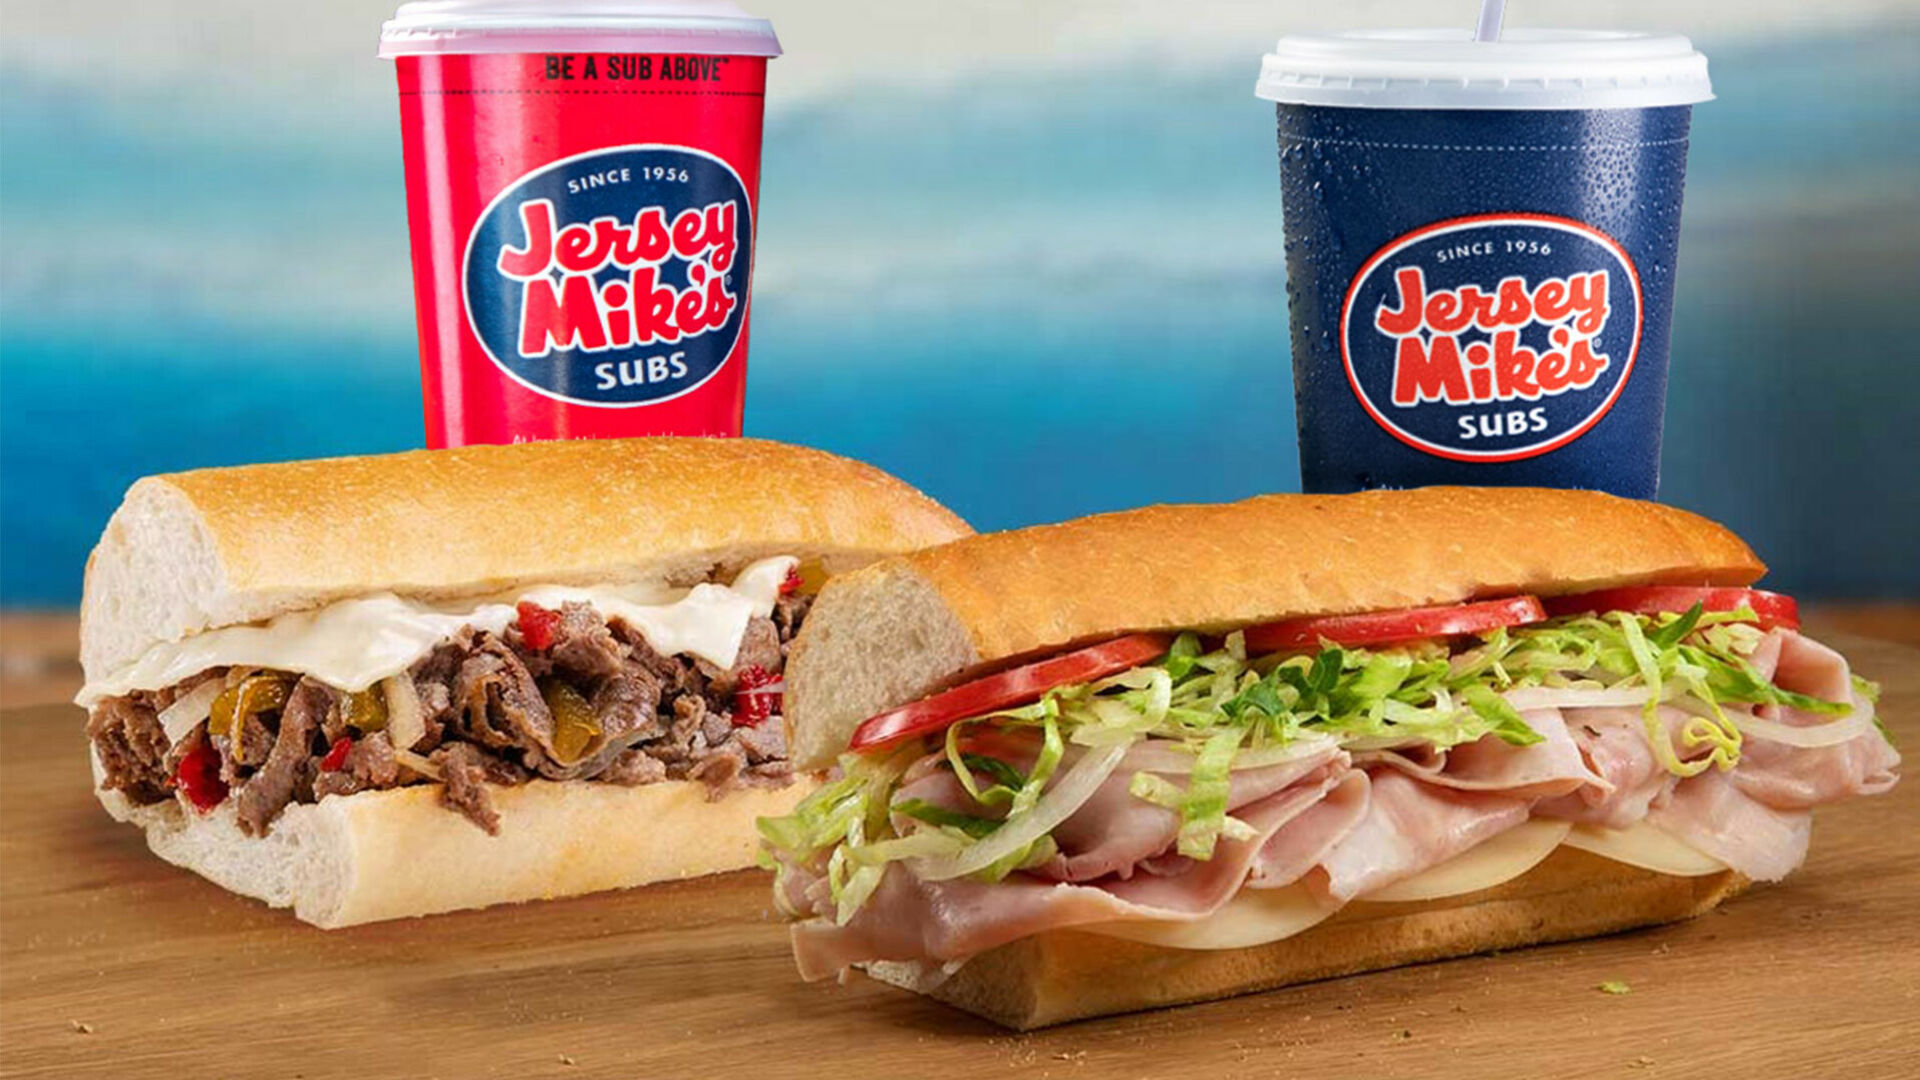 First E.C. Jersey Mike's to Open on May 24 - the grand opening